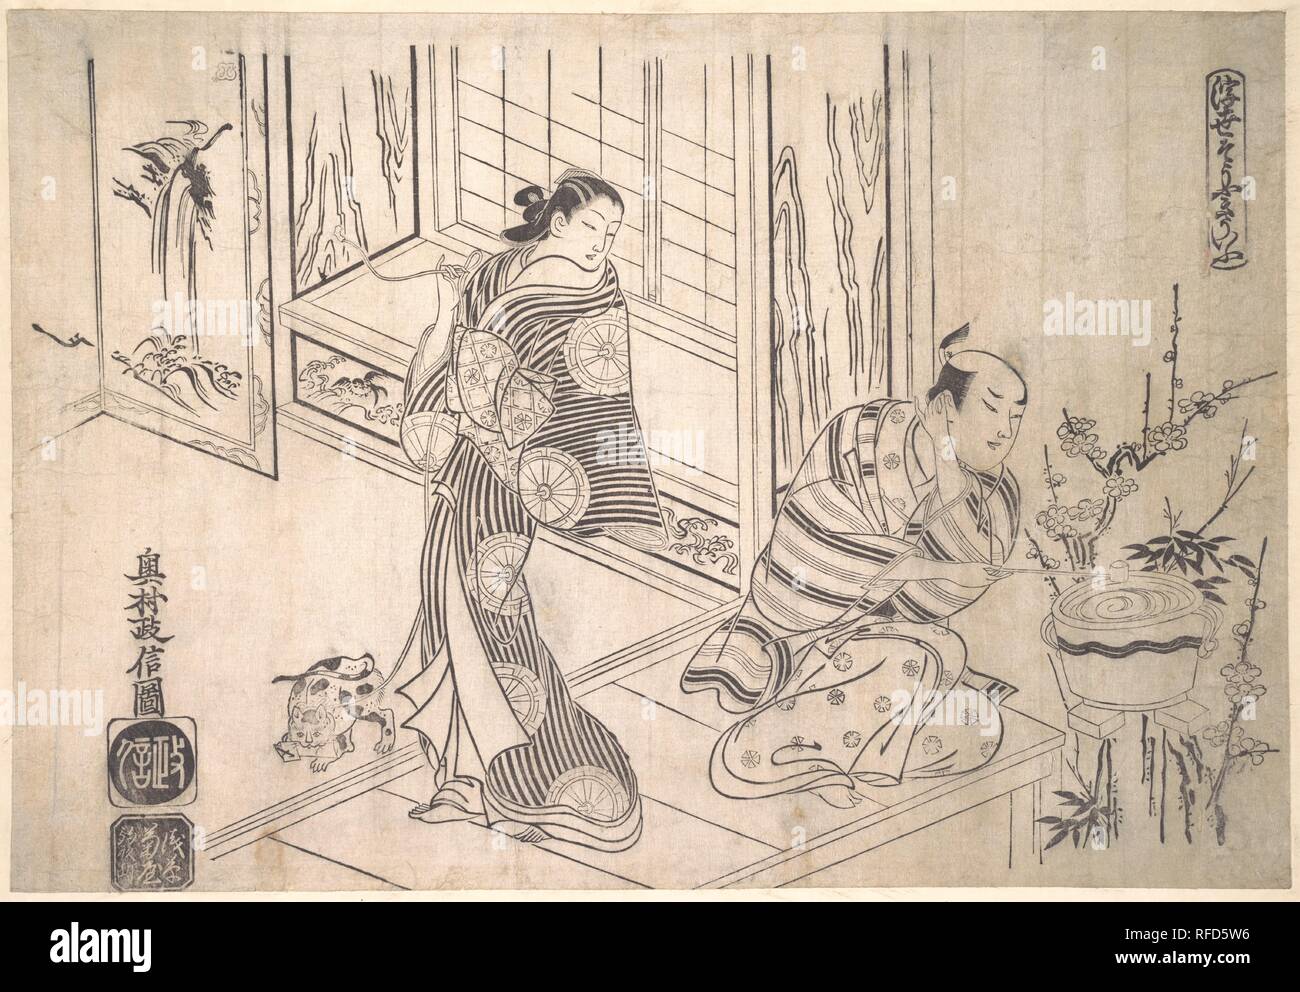 Parody of the Legend of Xu You and Chao Fu. Artist: Okumura Masanobu (Japanese, 1686-1764). Culture: Japan. Dimensions: 11 3/8 x 16 1/4 in. (28.9 x 41.3 cm). Date: ca. 1715.  In a highly amusing and complicated mitate version of this legend, Xu You appears as an embarrassed, two-timing Edo lover and Chao Fu as his reproachful mistress. He is washing out his ears in a desperate effort to convince her that he knows absolutely nothing of a letter from her rival. The letter discovered by the mistress is seen in the mouth of her cat. The classical allusion is veiled in the painted cascade that is p Stock Photo